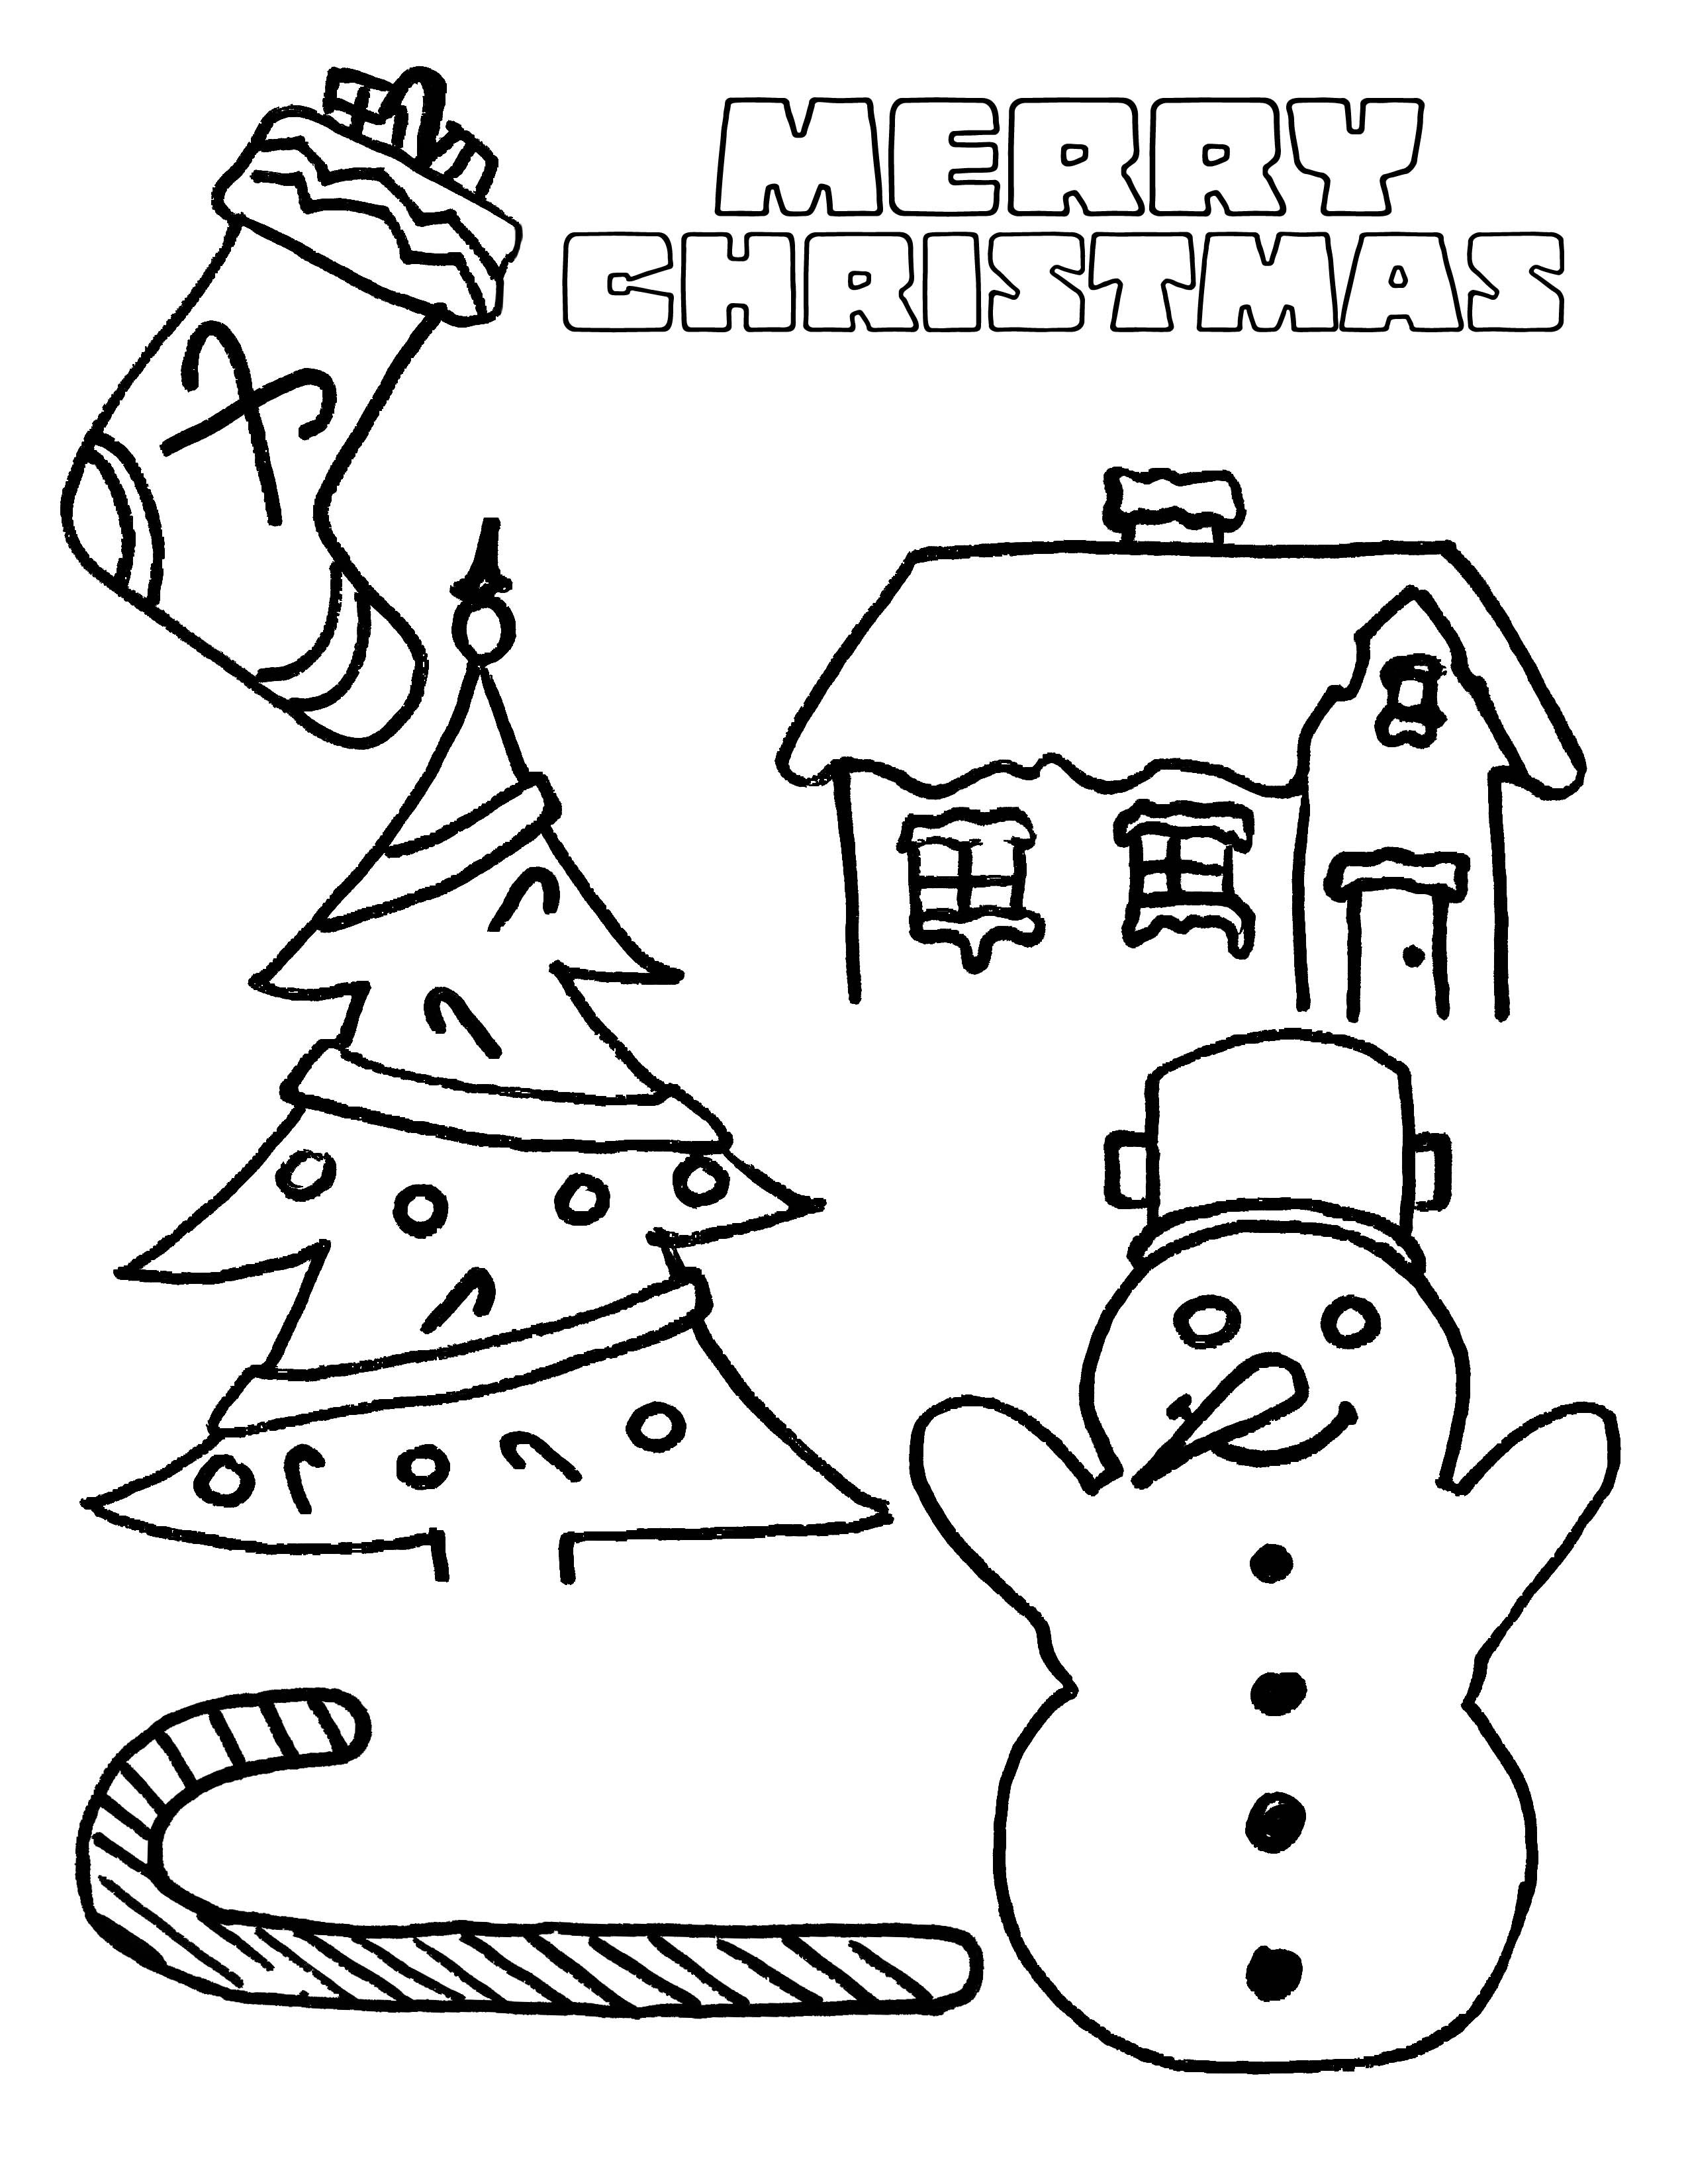 Free Printable Christmas Coloring Pages For Toddlers Party Simplicity Free Christmas Coloring Page For Kids